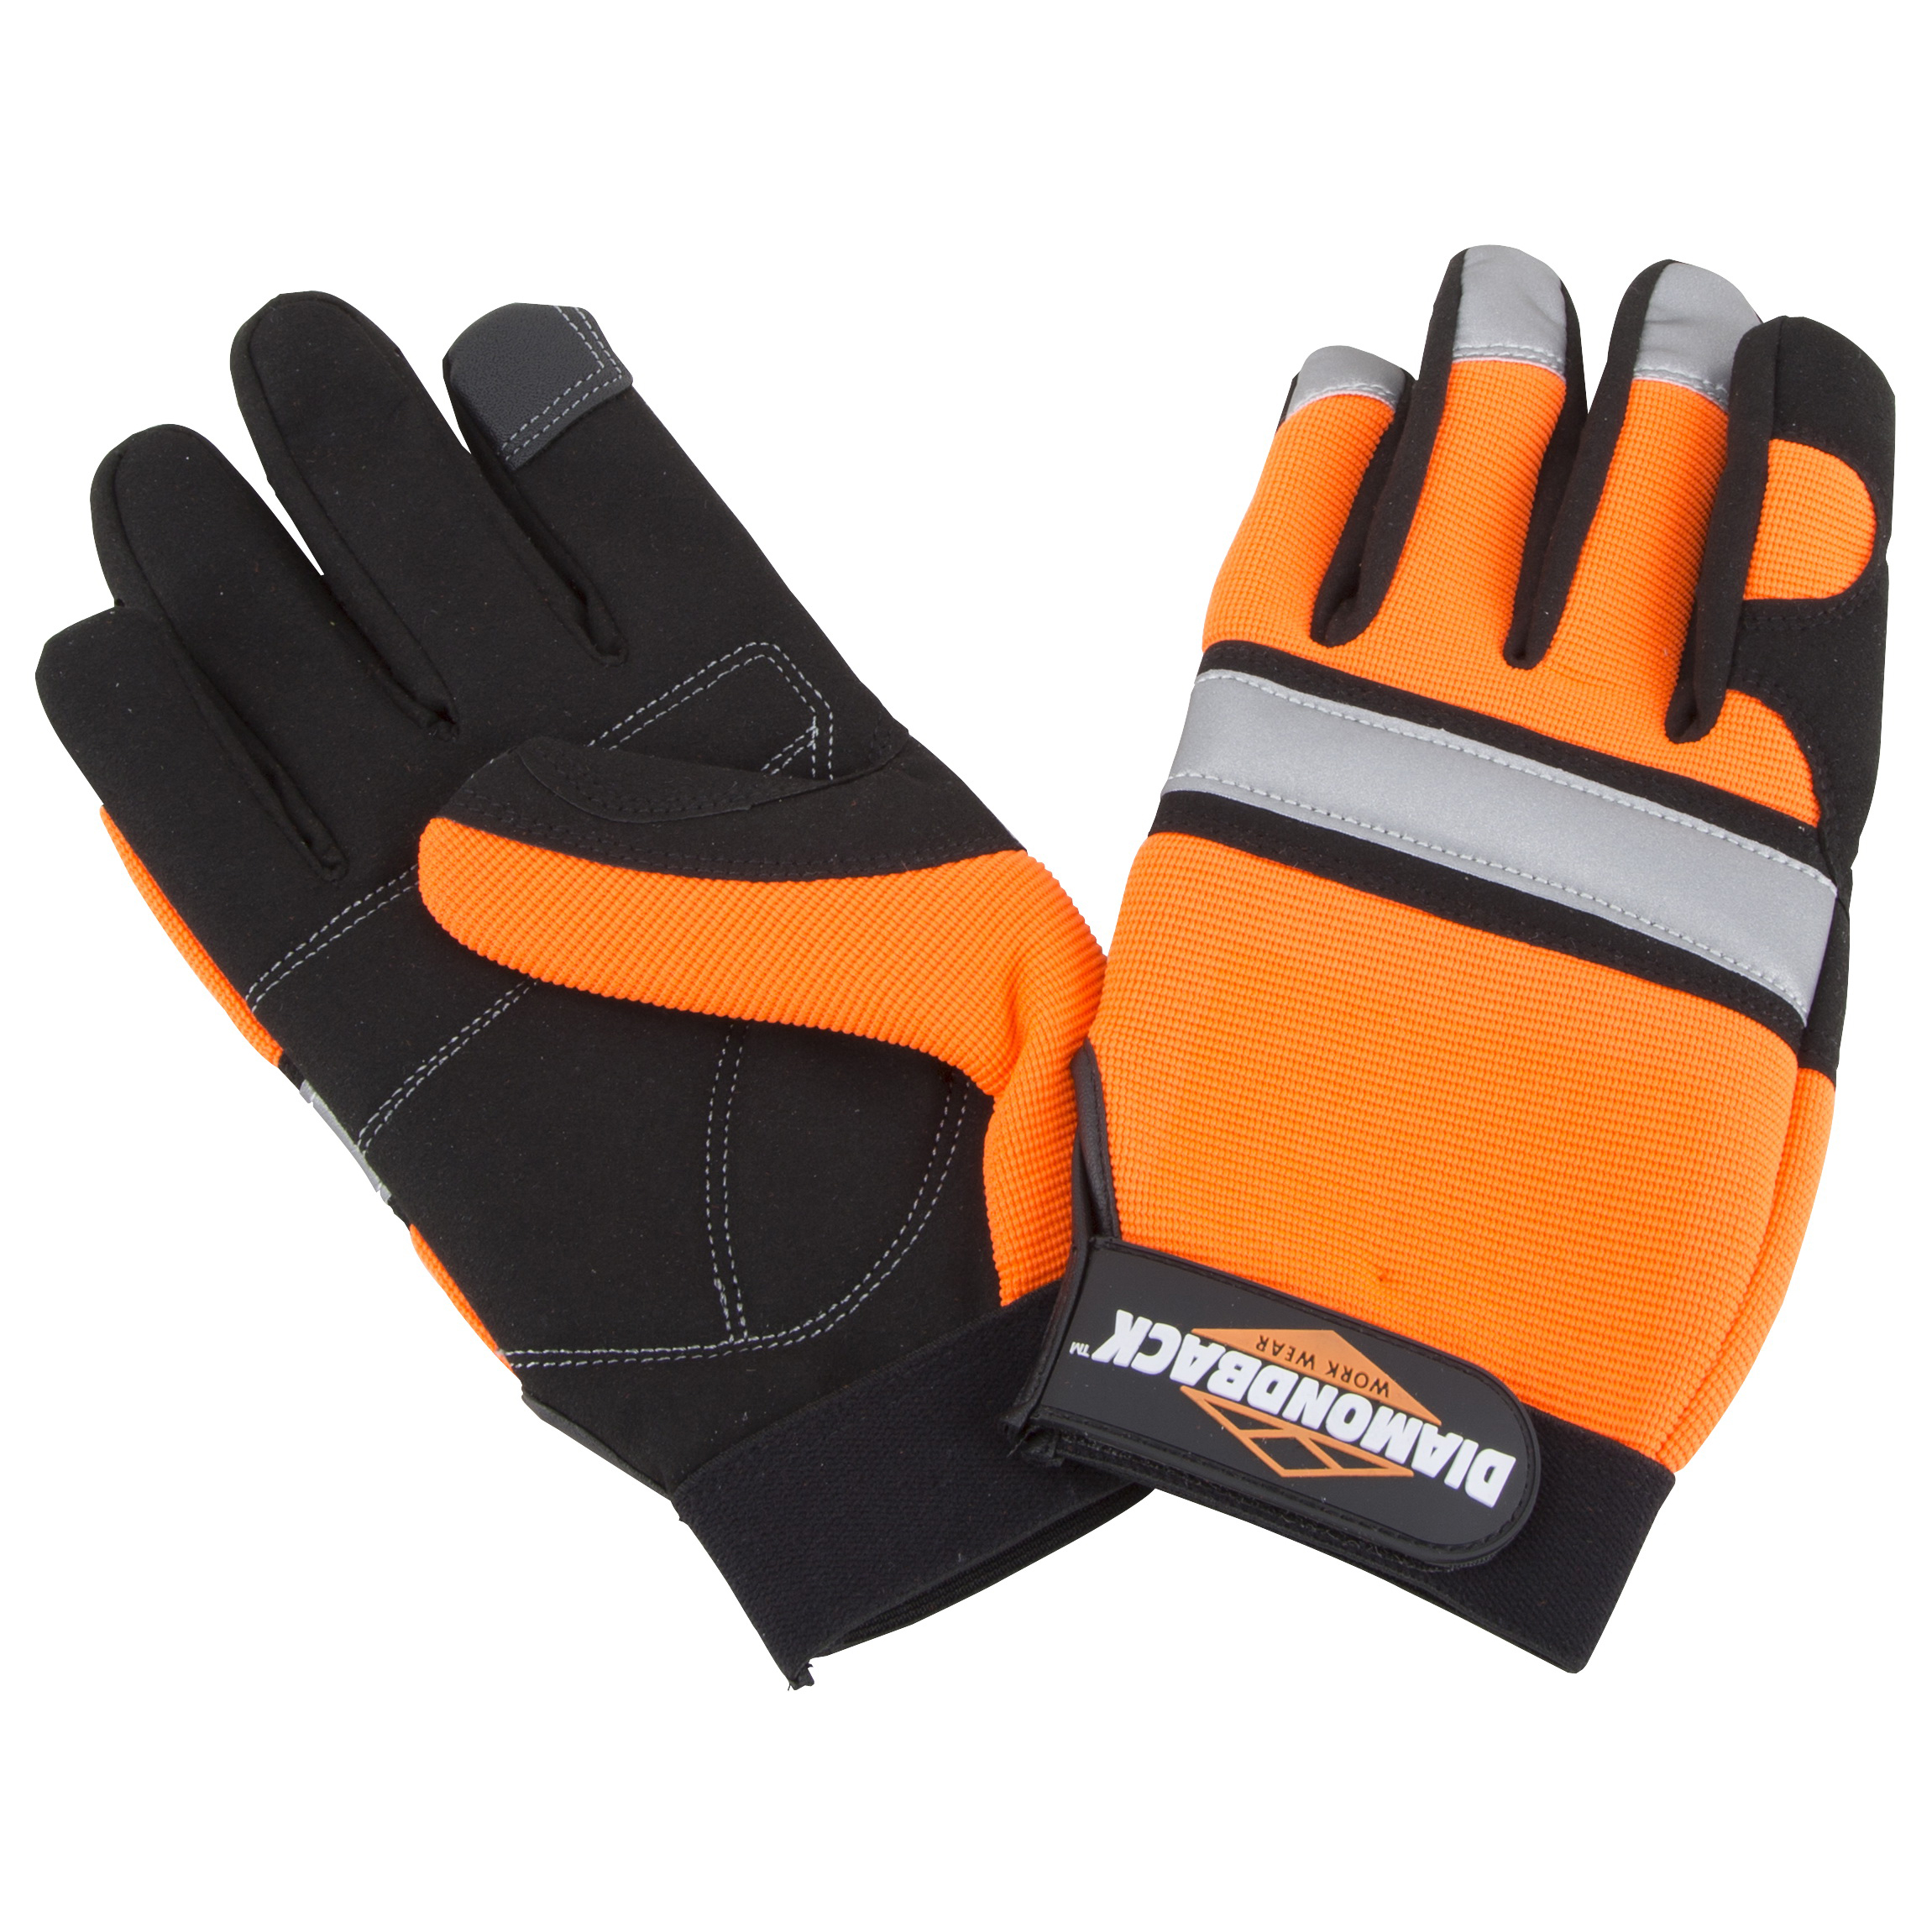 5959XL Touchscreen Hi Visibility Mechanics Gloves, XL, 55% Synthetic Leather 30% Spandex 10% Reflective Fabric 5% Elastic Band